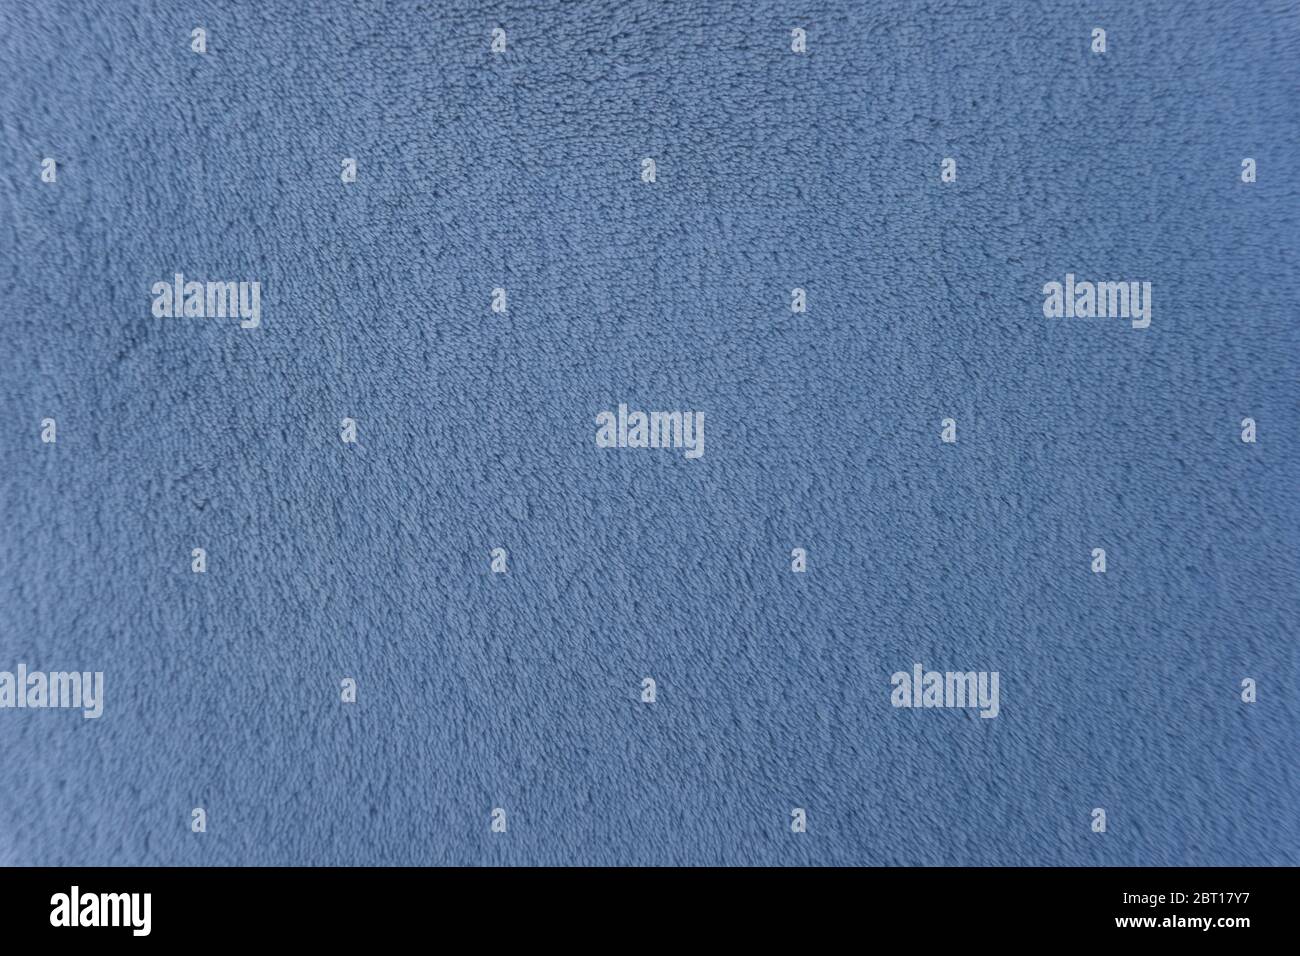 plush texture from the blue towel Stock Photo